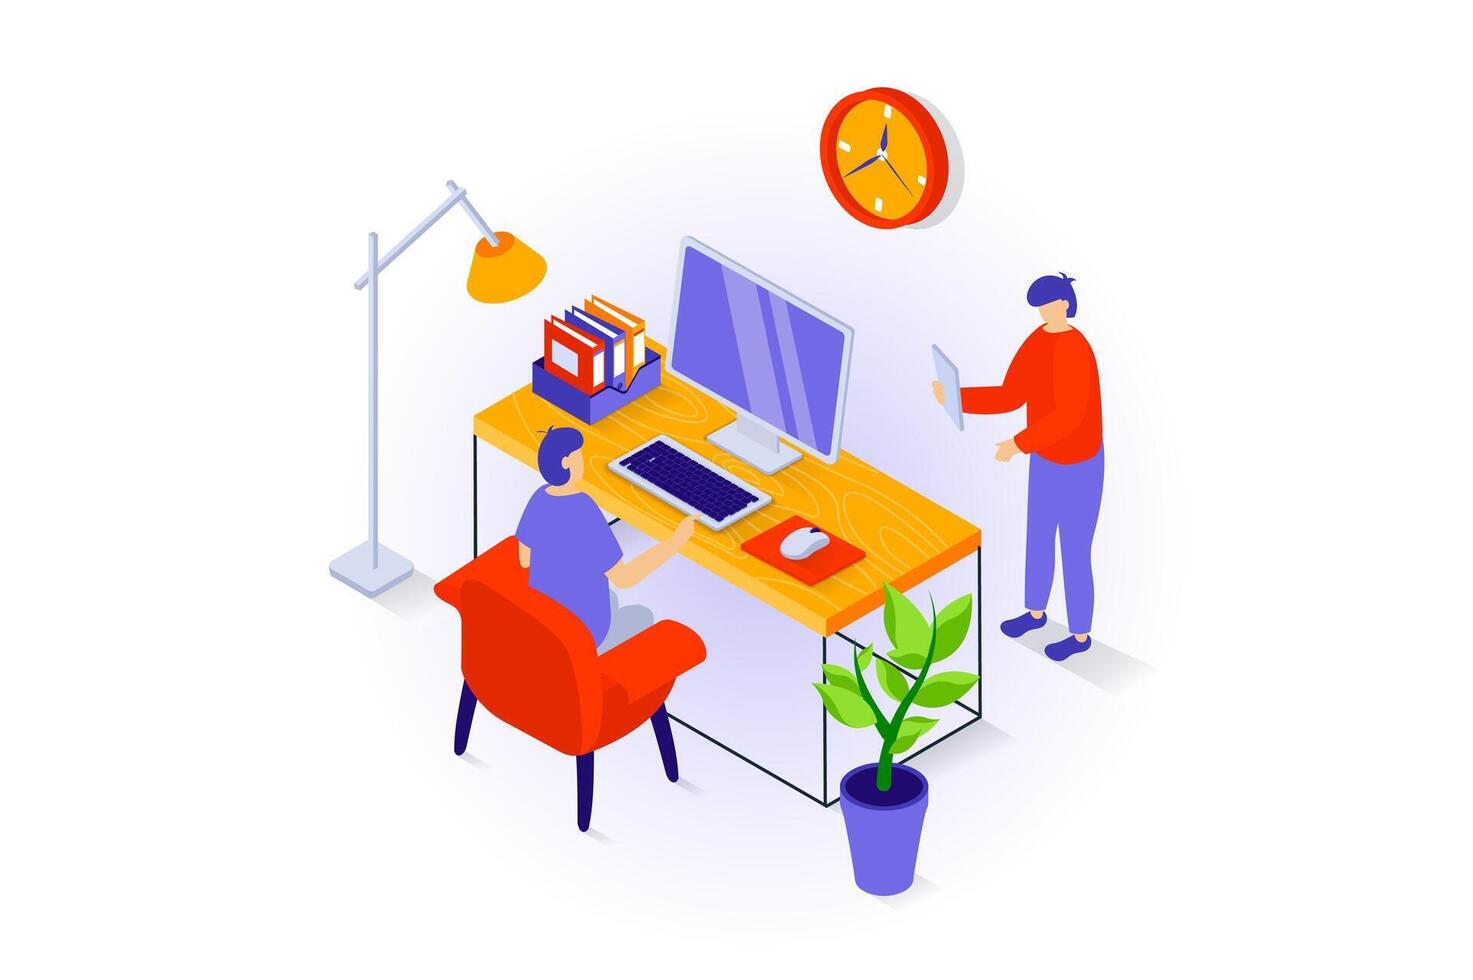 Home interior concept in 3d isometric design. People in workplace office with desk and chair, floor lamp, desktop computer, documents and plant. Vector illustration with isometry scene for web graphic